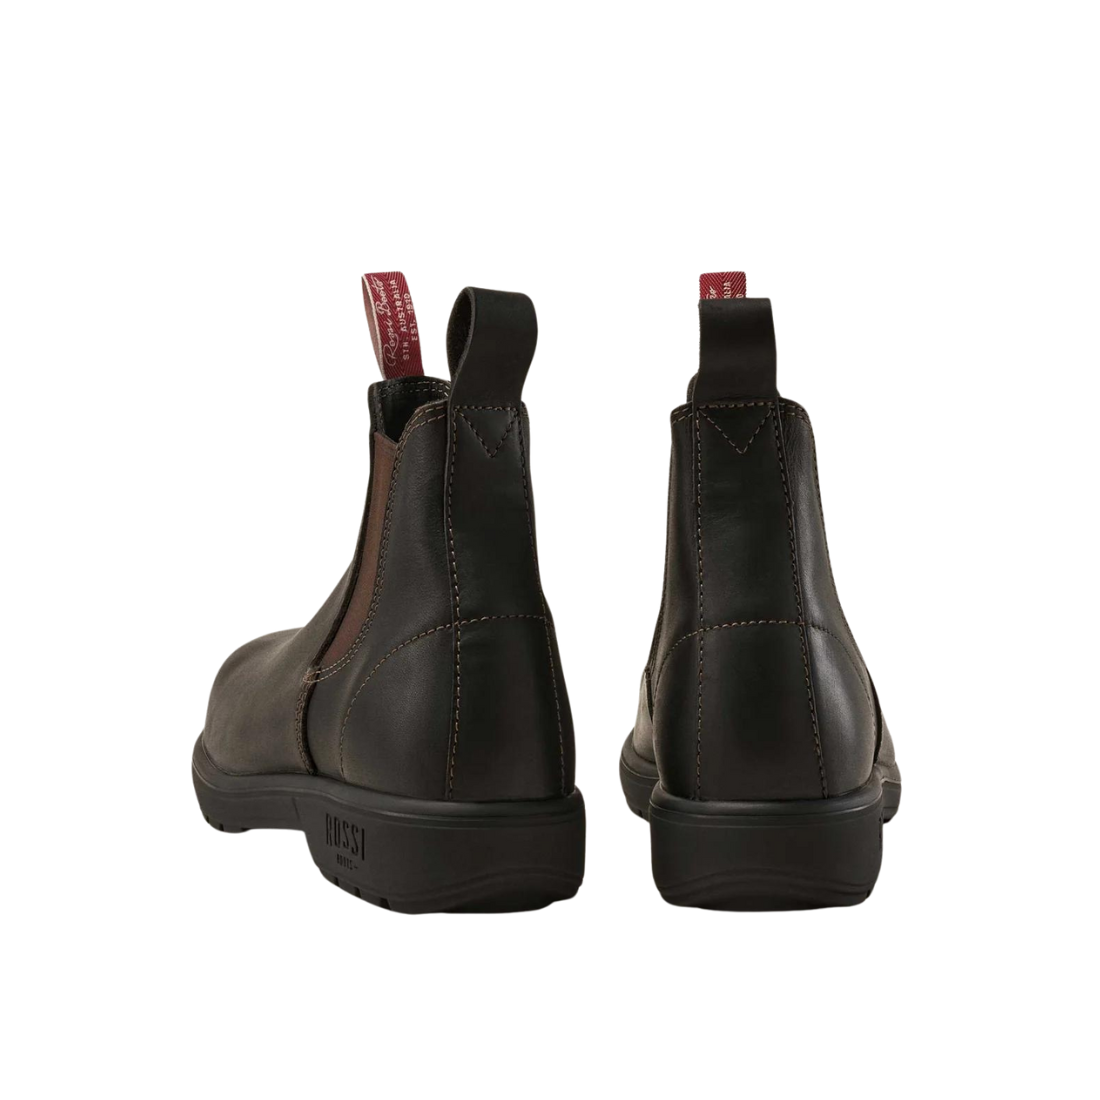 Rossi 700 Trojan Safety Pull-on Workboot Claret Workboots by Rossi | The Bloke Shop